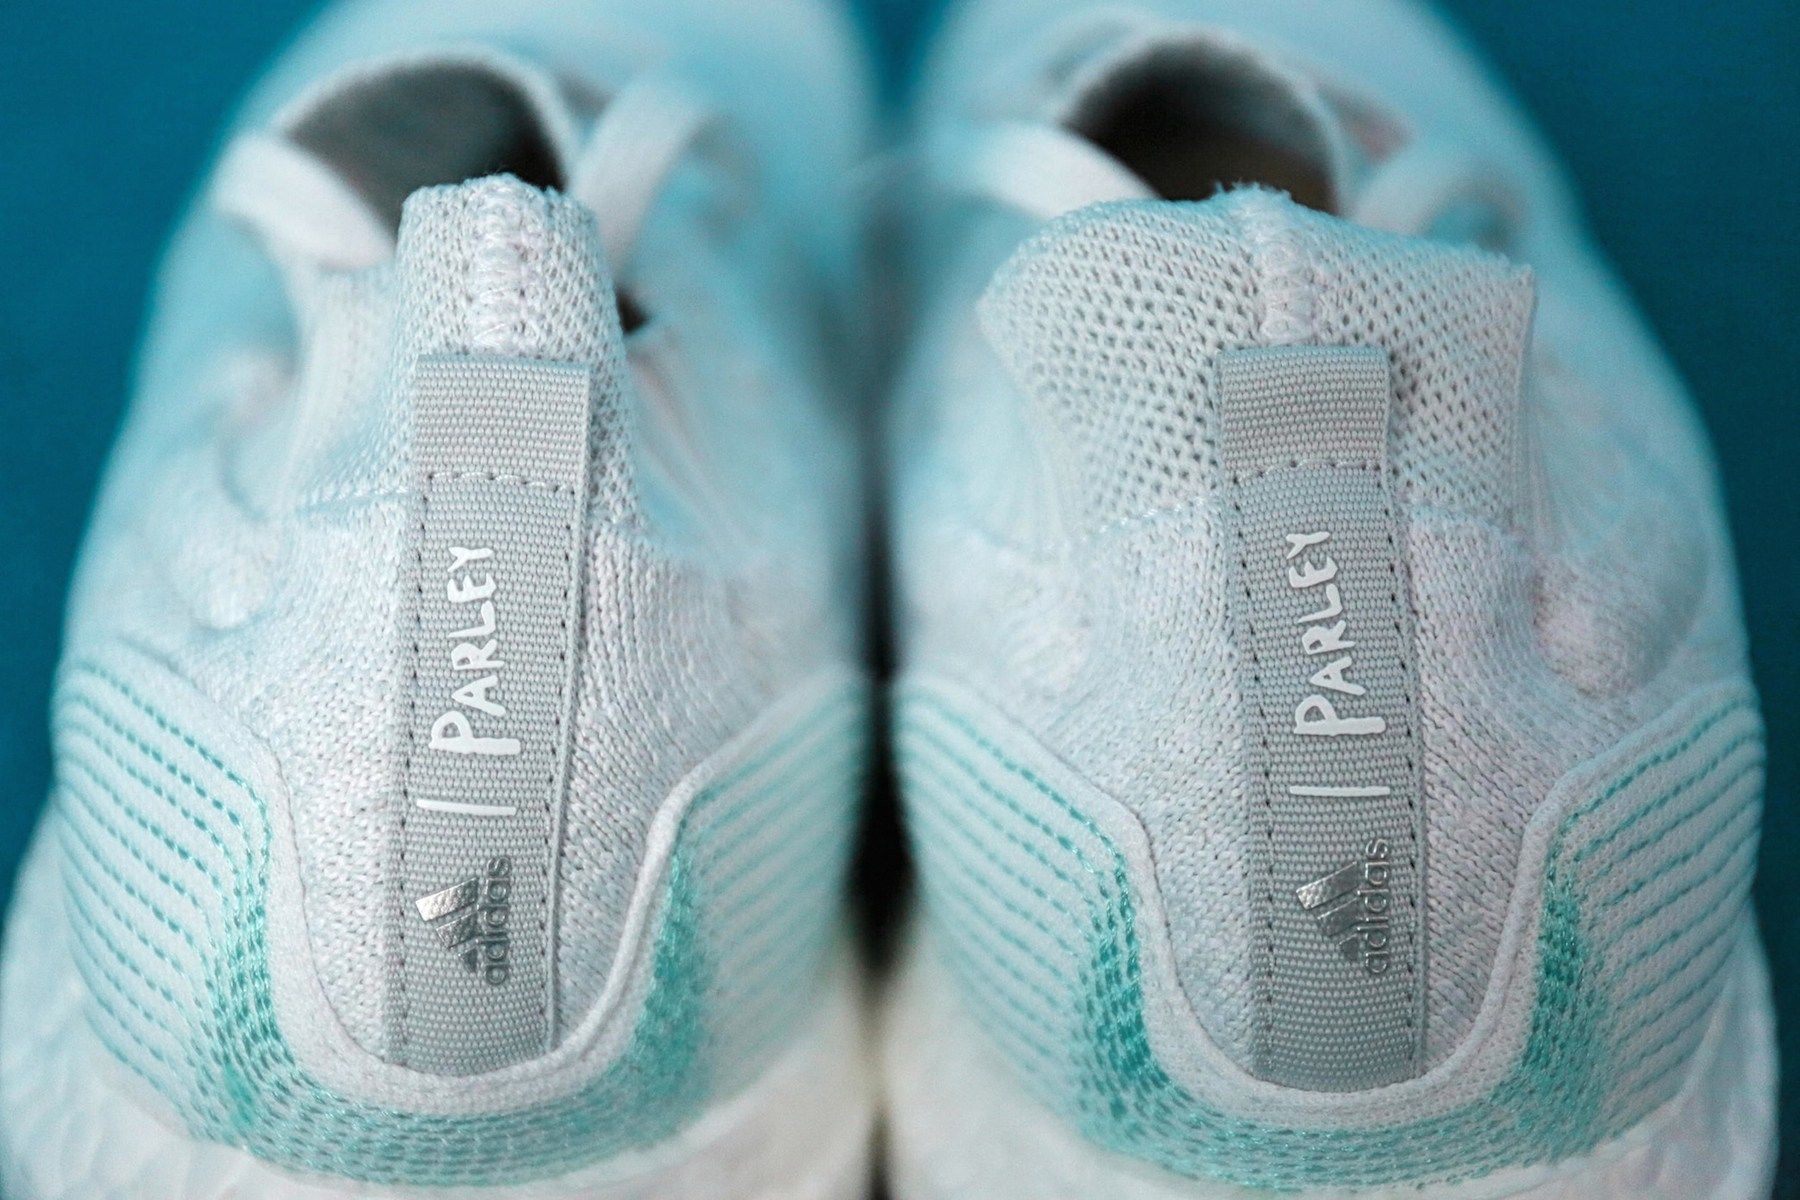 Parley X Adidas Ultra Boost Uncaged 3